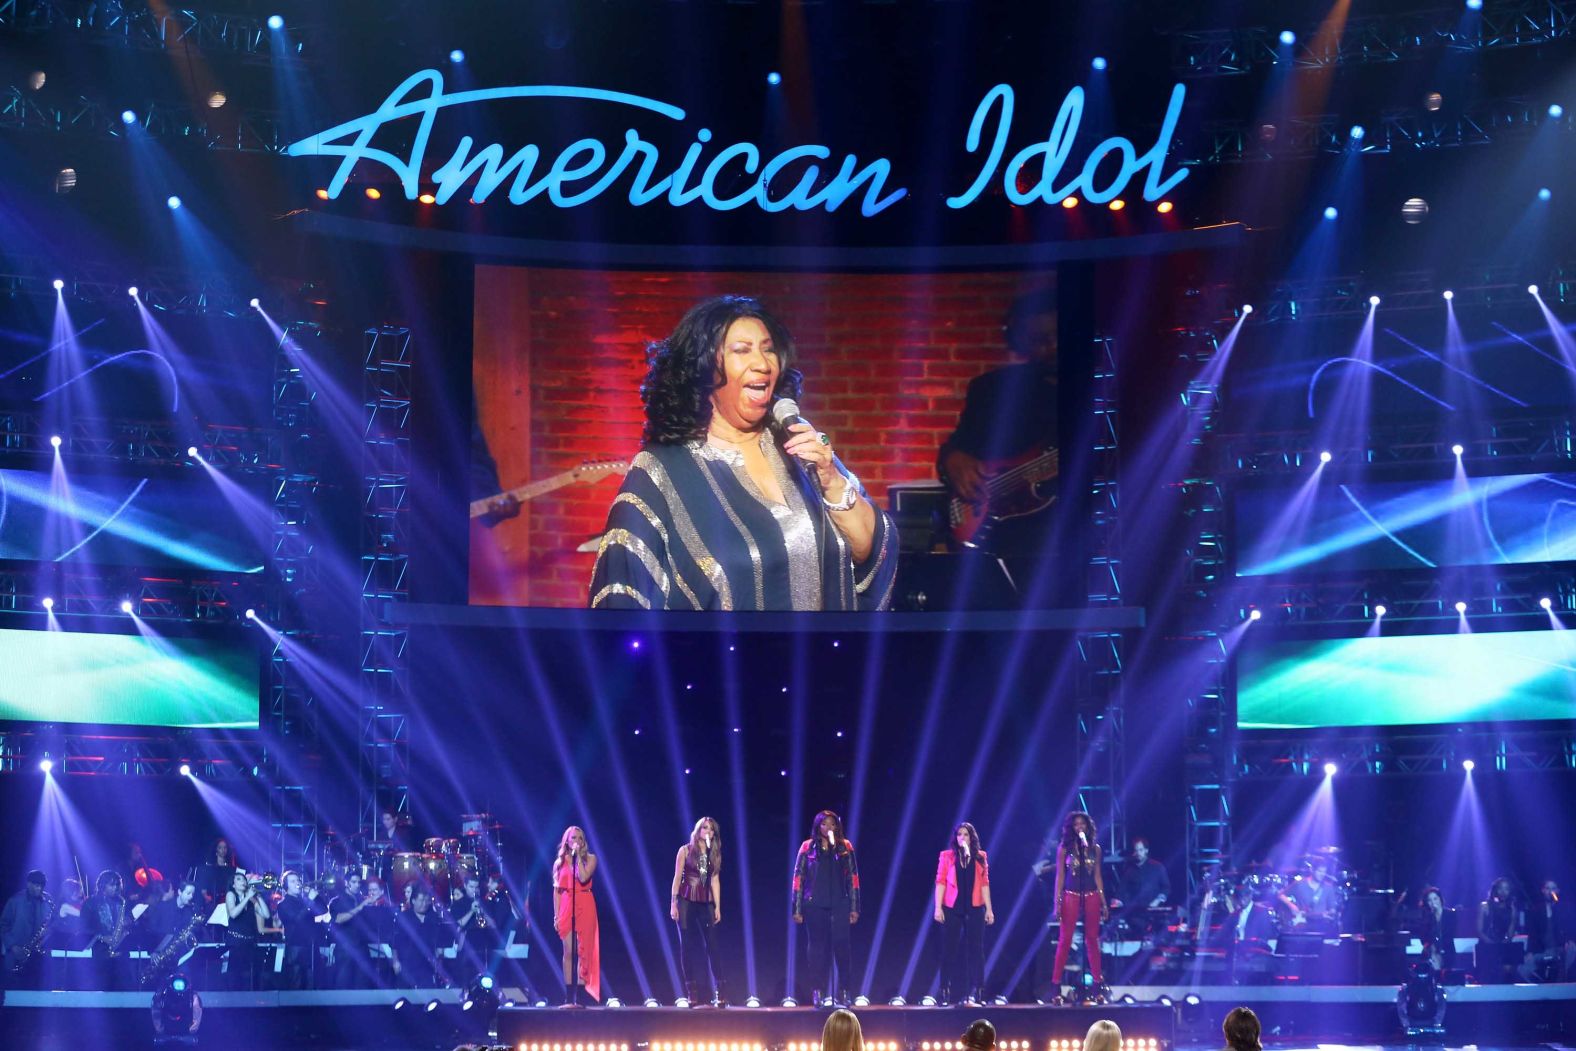 Franklin, seen on screen, at the "American Idol" finale in 2013.